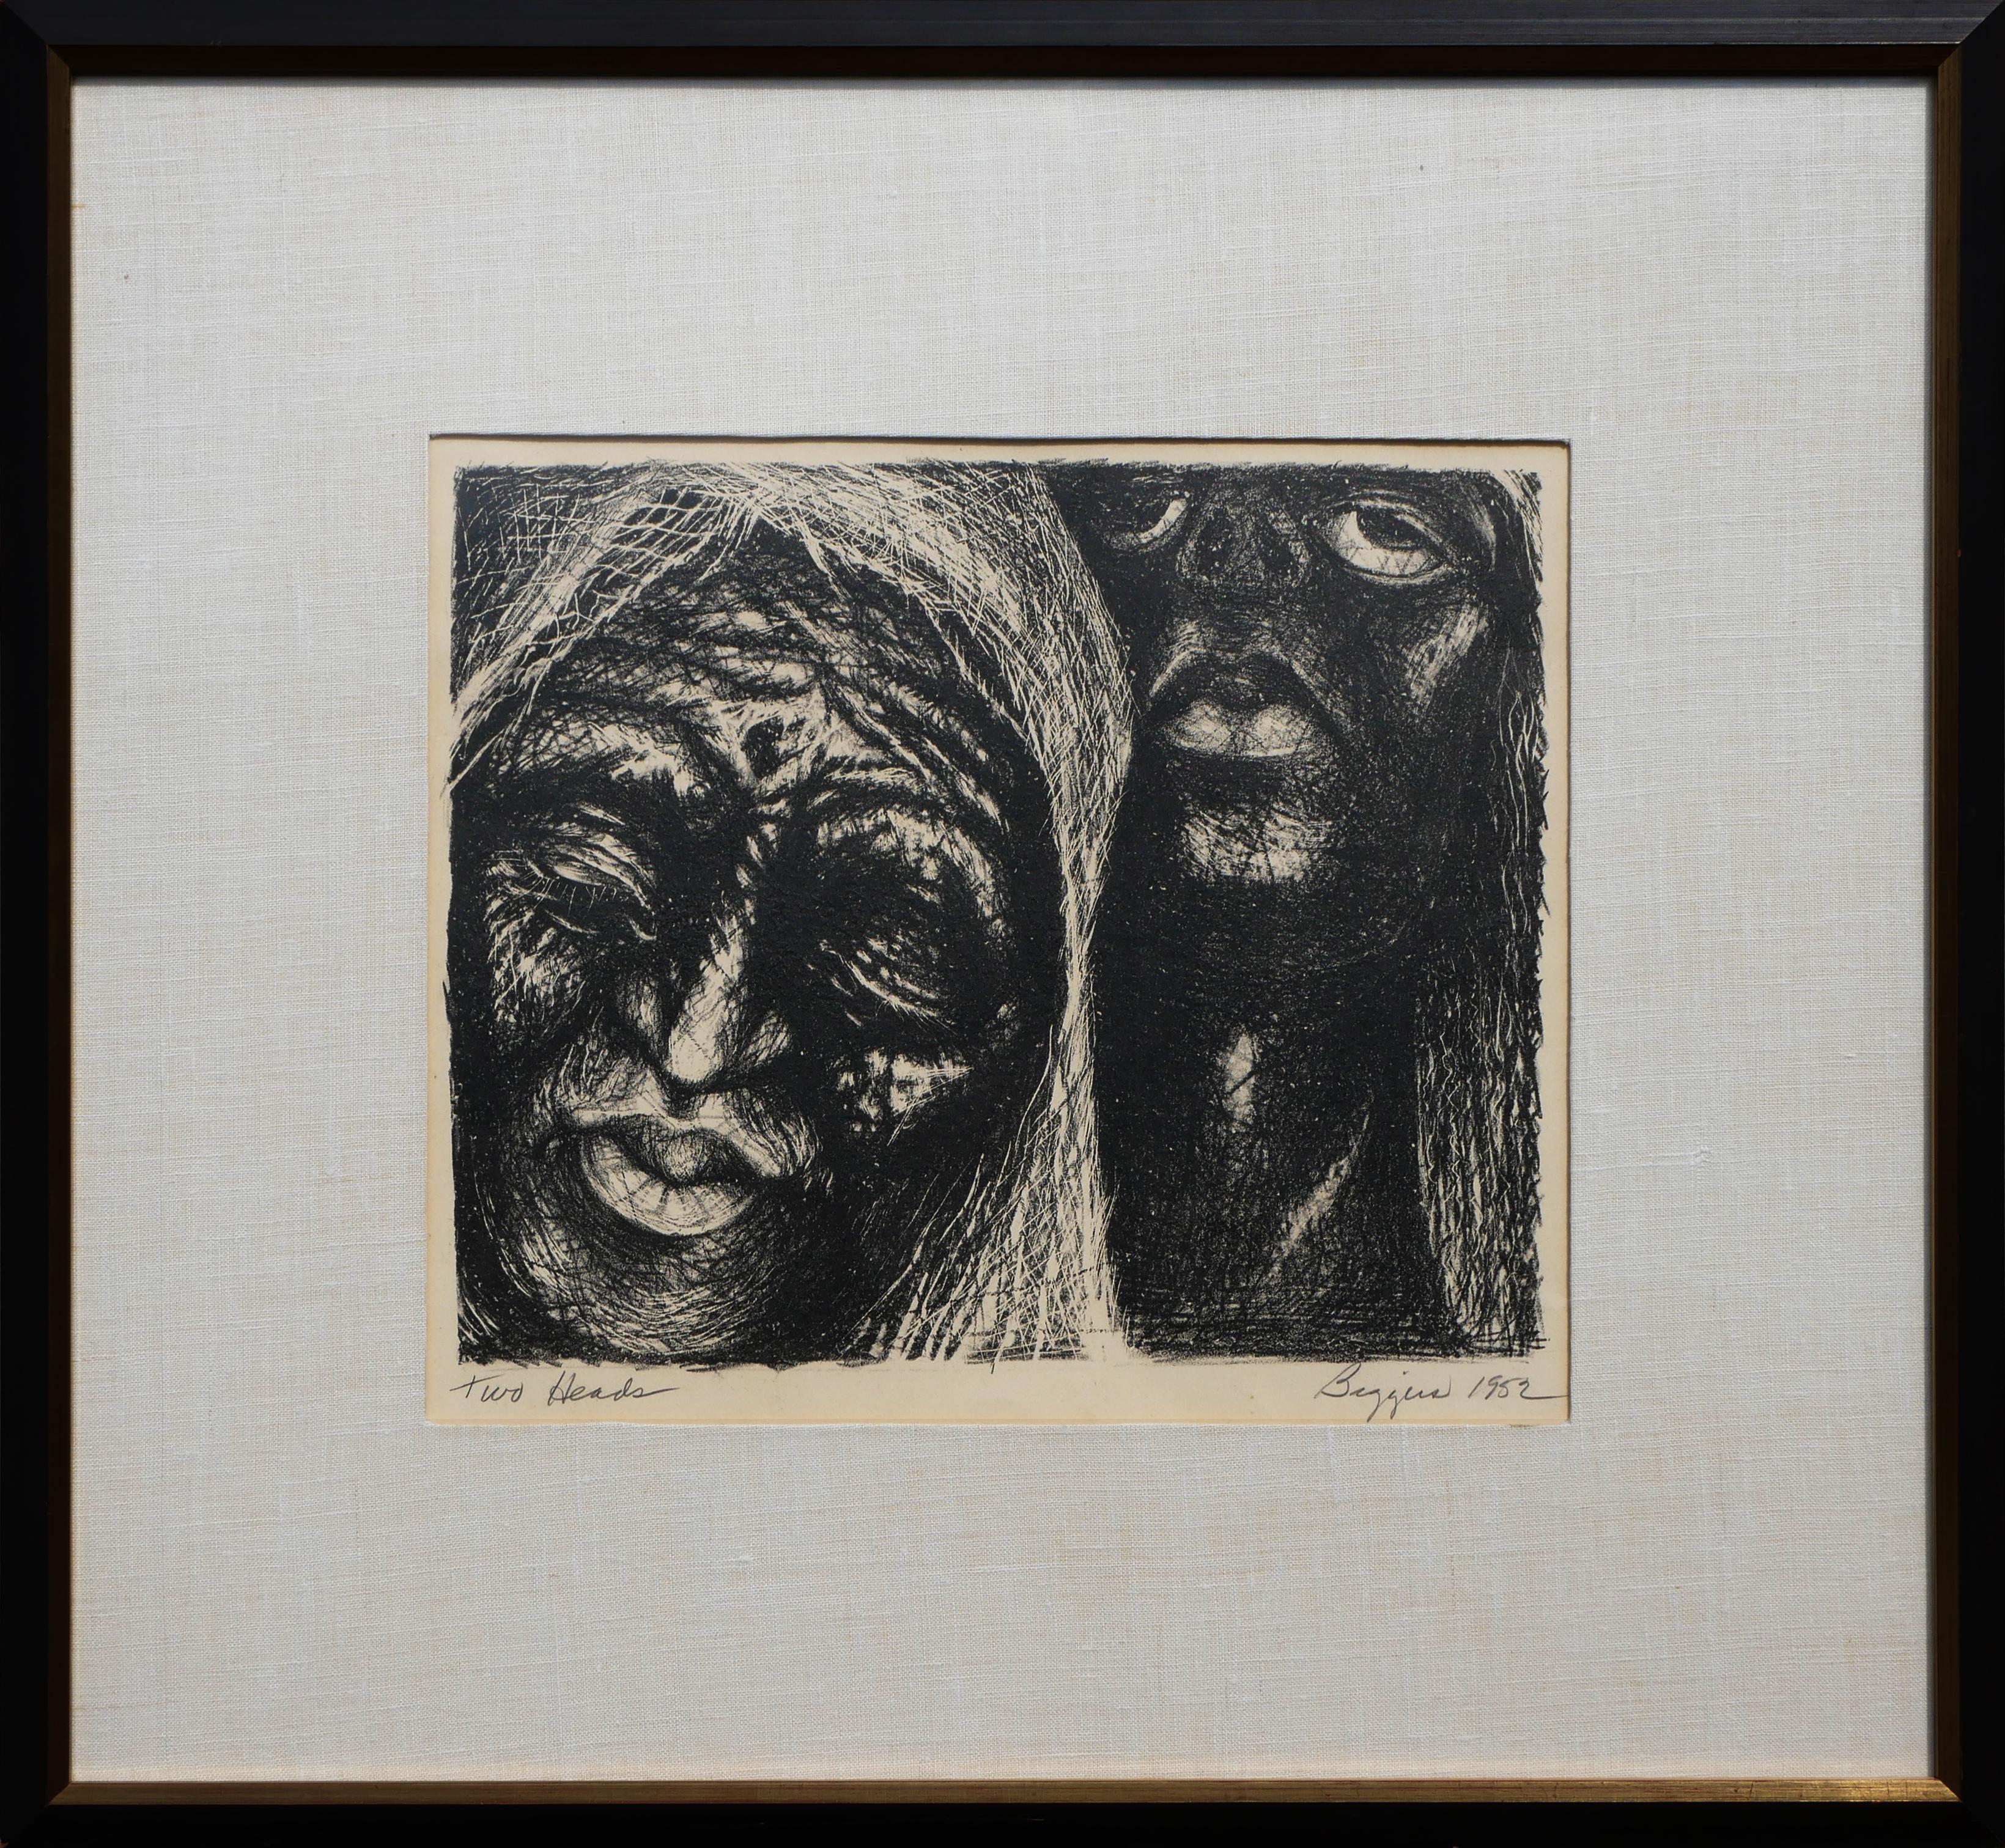 John Biggers Abstract Print - “Two Heads” Modern Abstract Black and White Woodcut Print of Two Figures